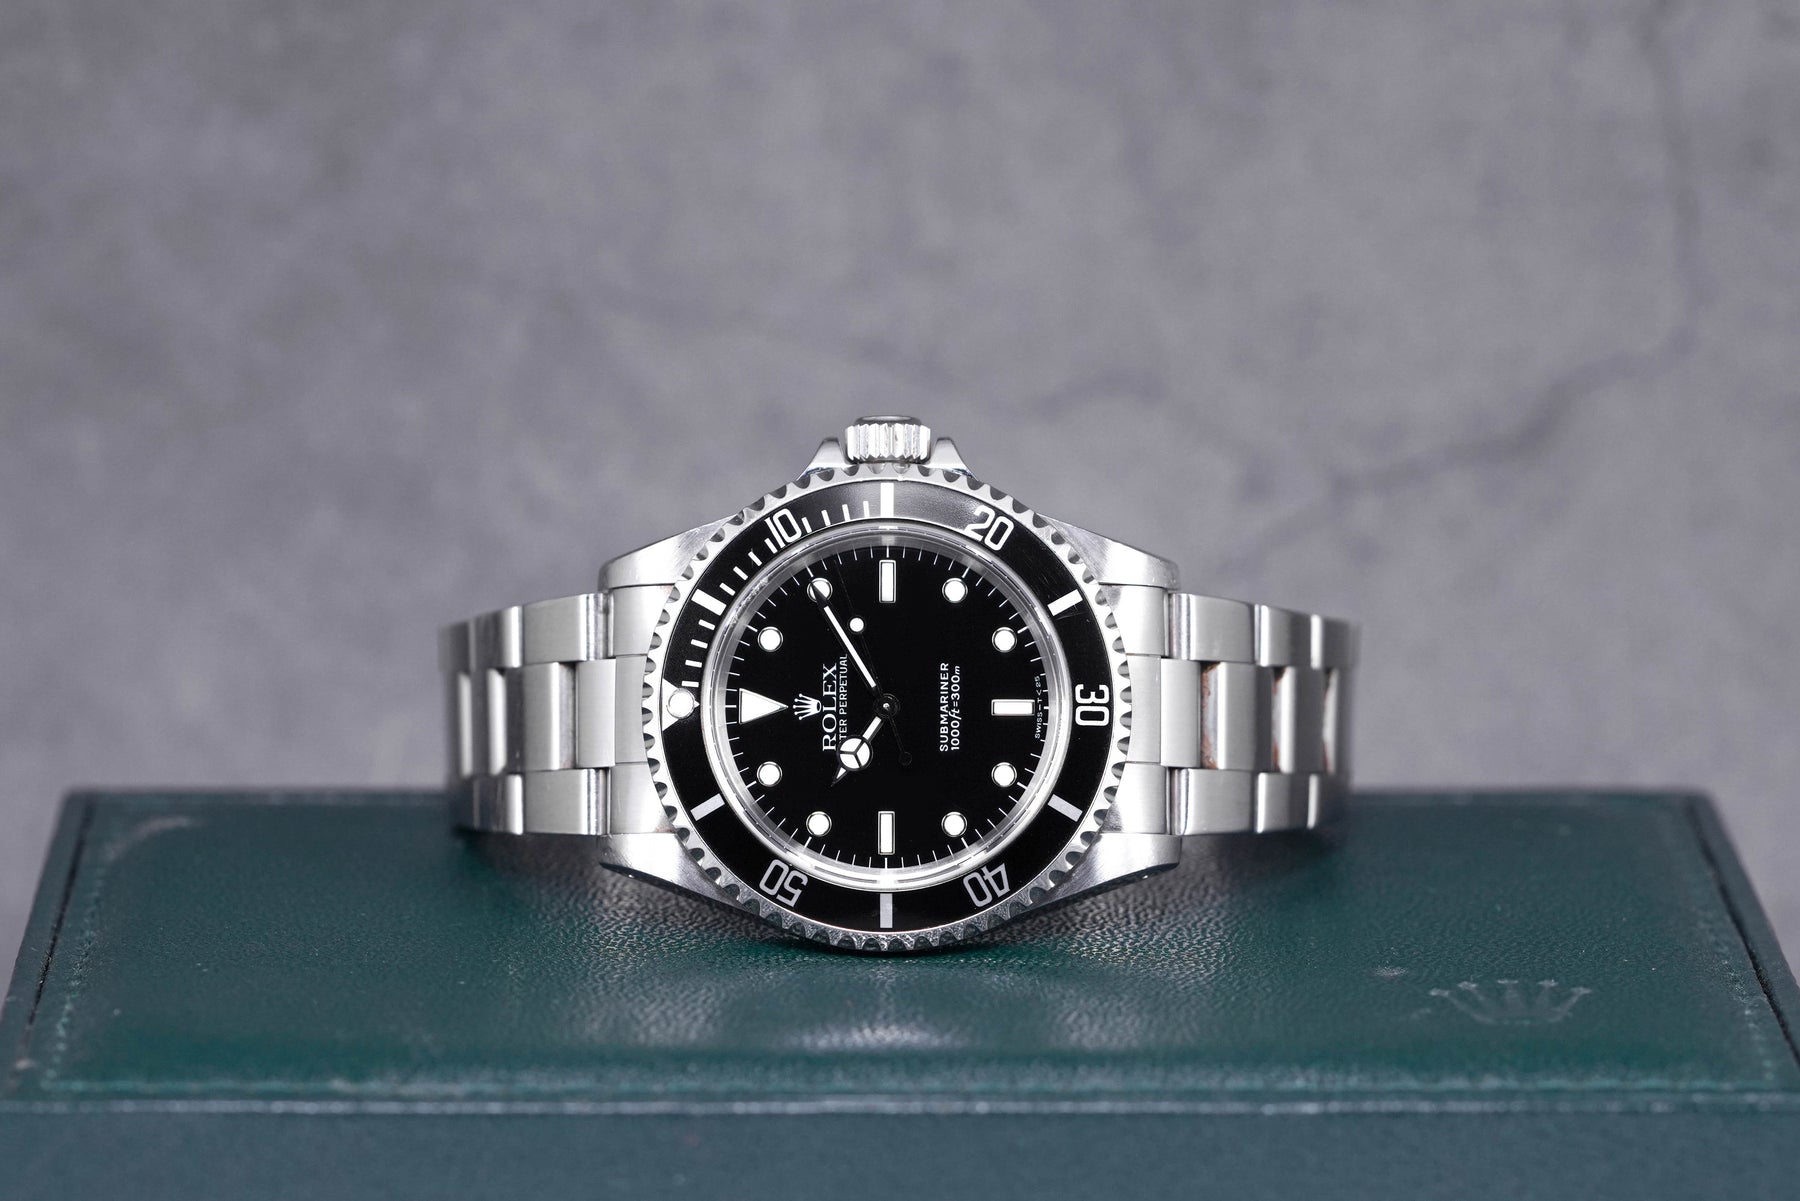 ROLEX SUBMARINER NO DATE 2 LINERS 1996